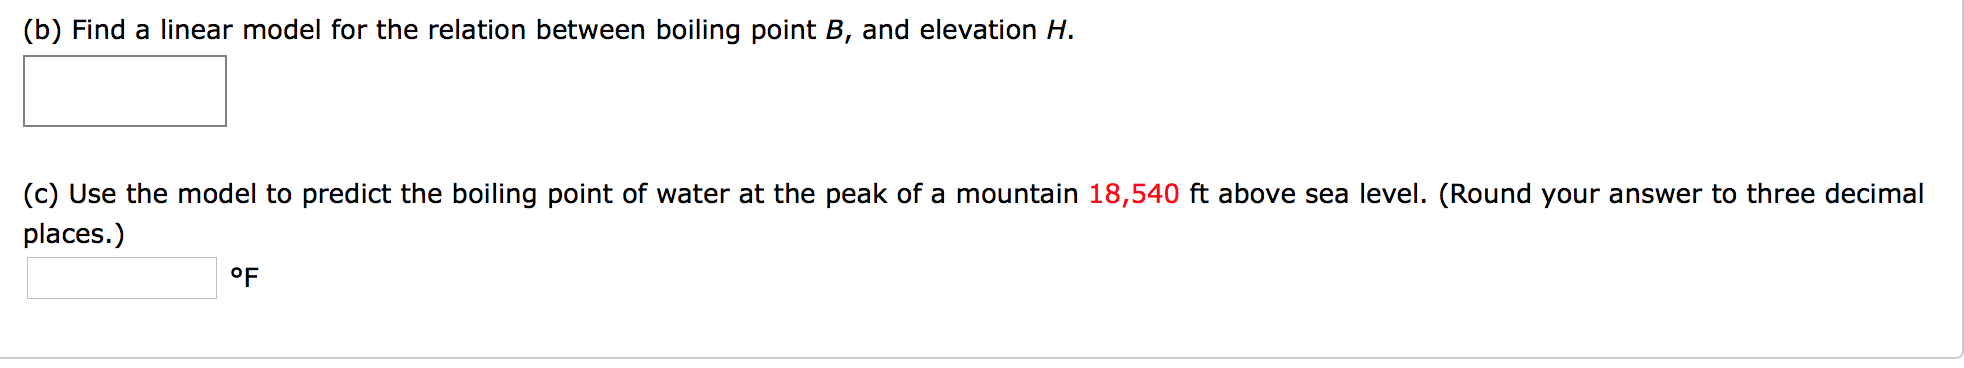 (b) Find a linear model for the relation between boiling point B, and elevation H.
(c) Use the model to predict the boiling point of water at the peak of a mountain 18,540 ft above sea level. (Round your answer to three decimal
places.)
oF
